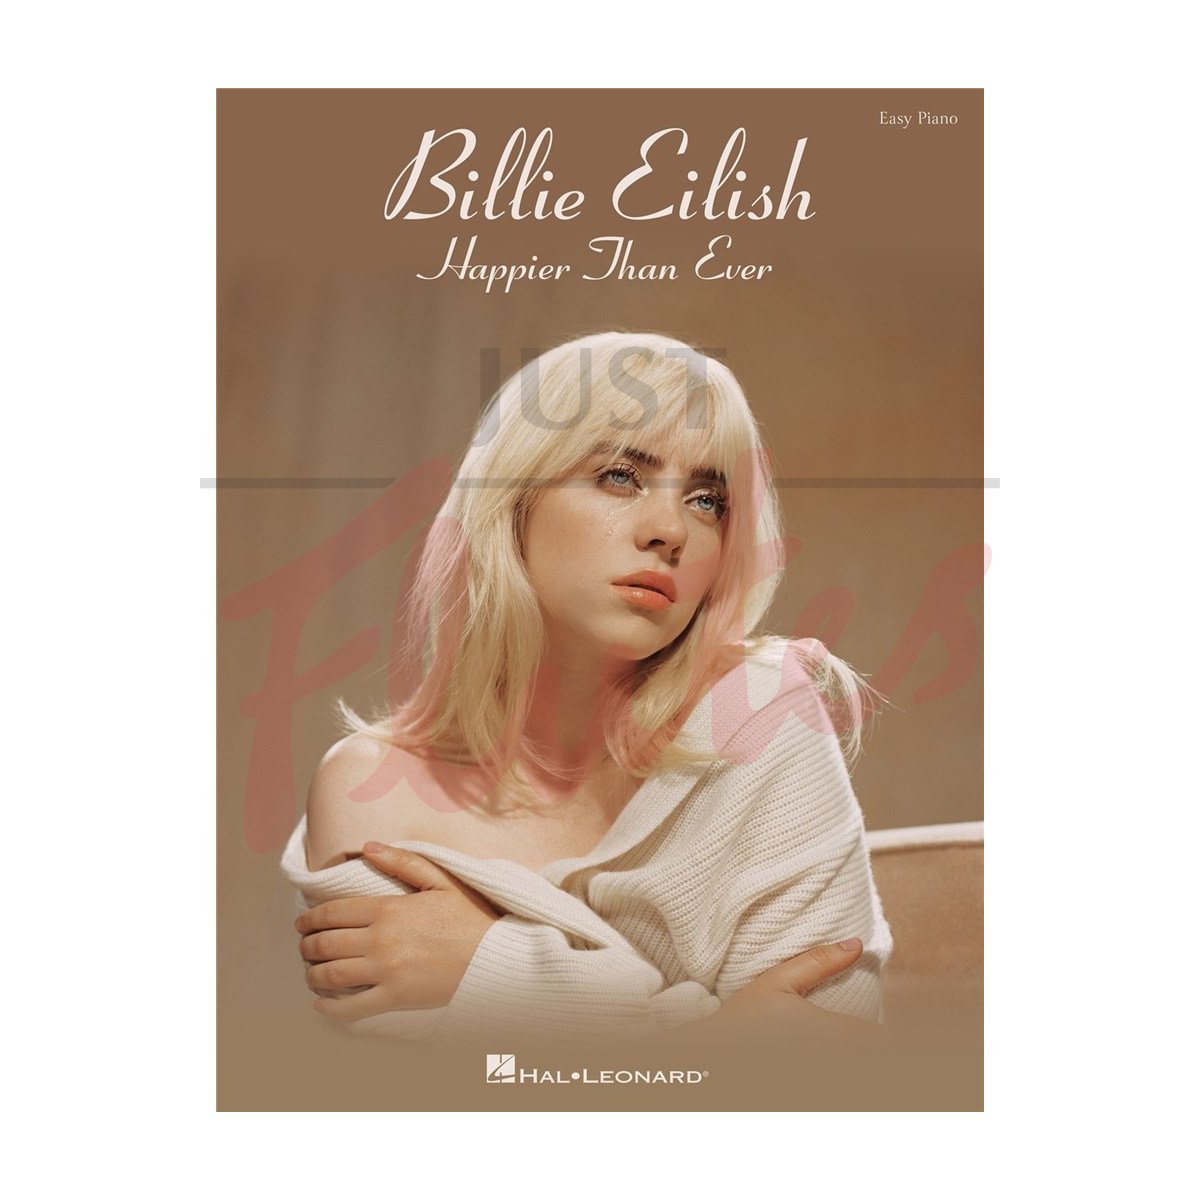 Billie Eilish: Happier Than Even for Easy Piano